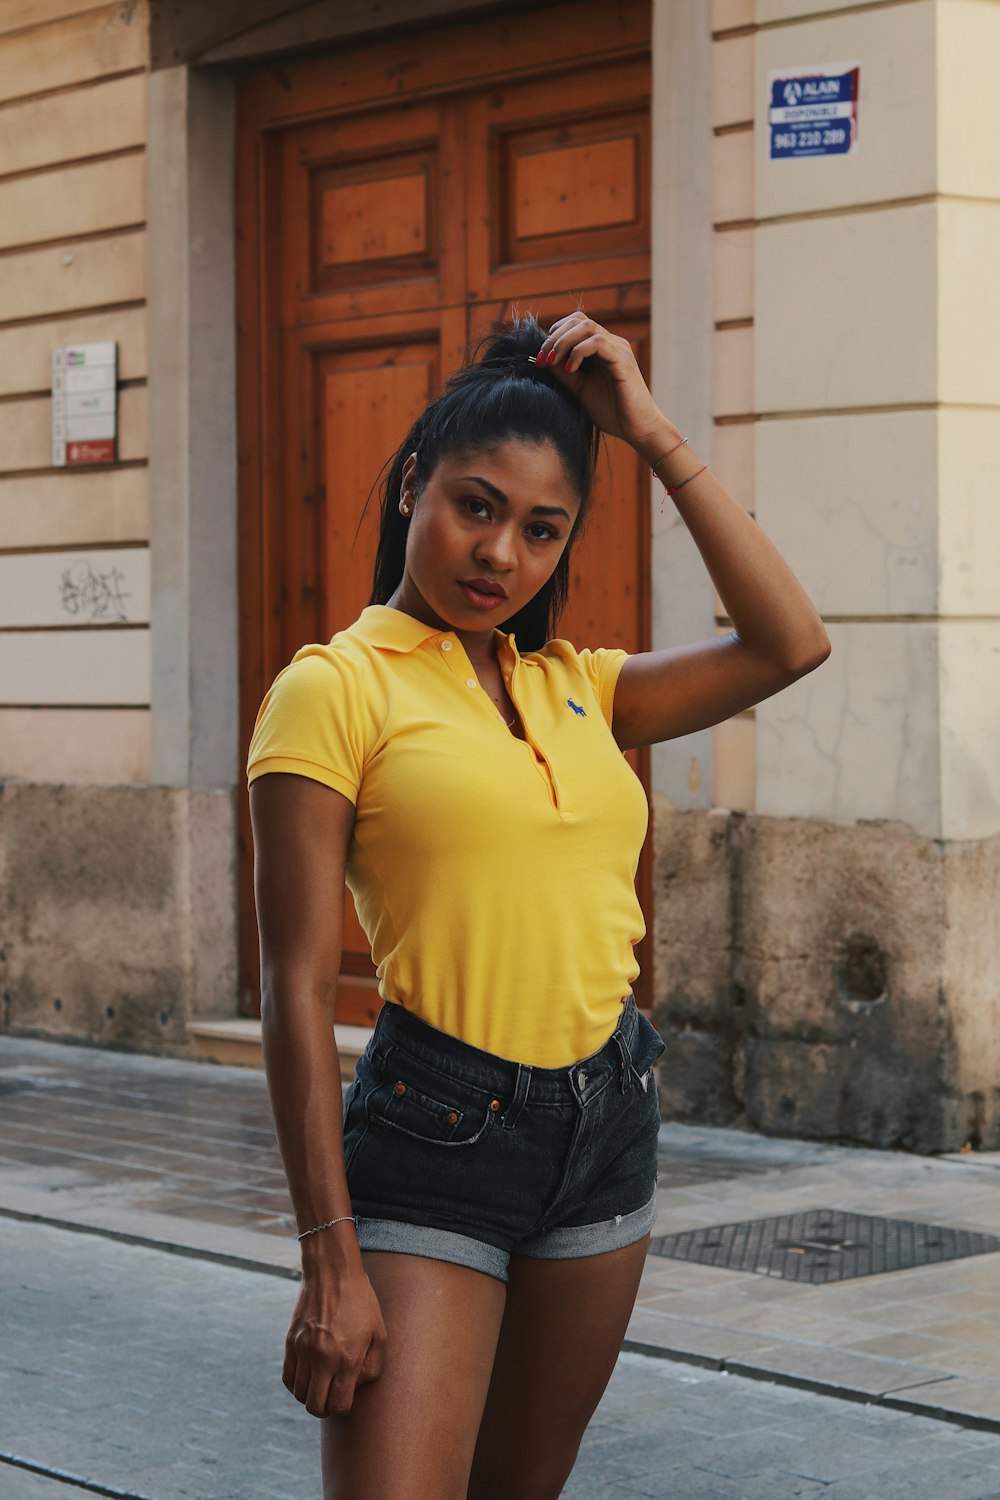 a woman in a yellow shirt is posing for a picture